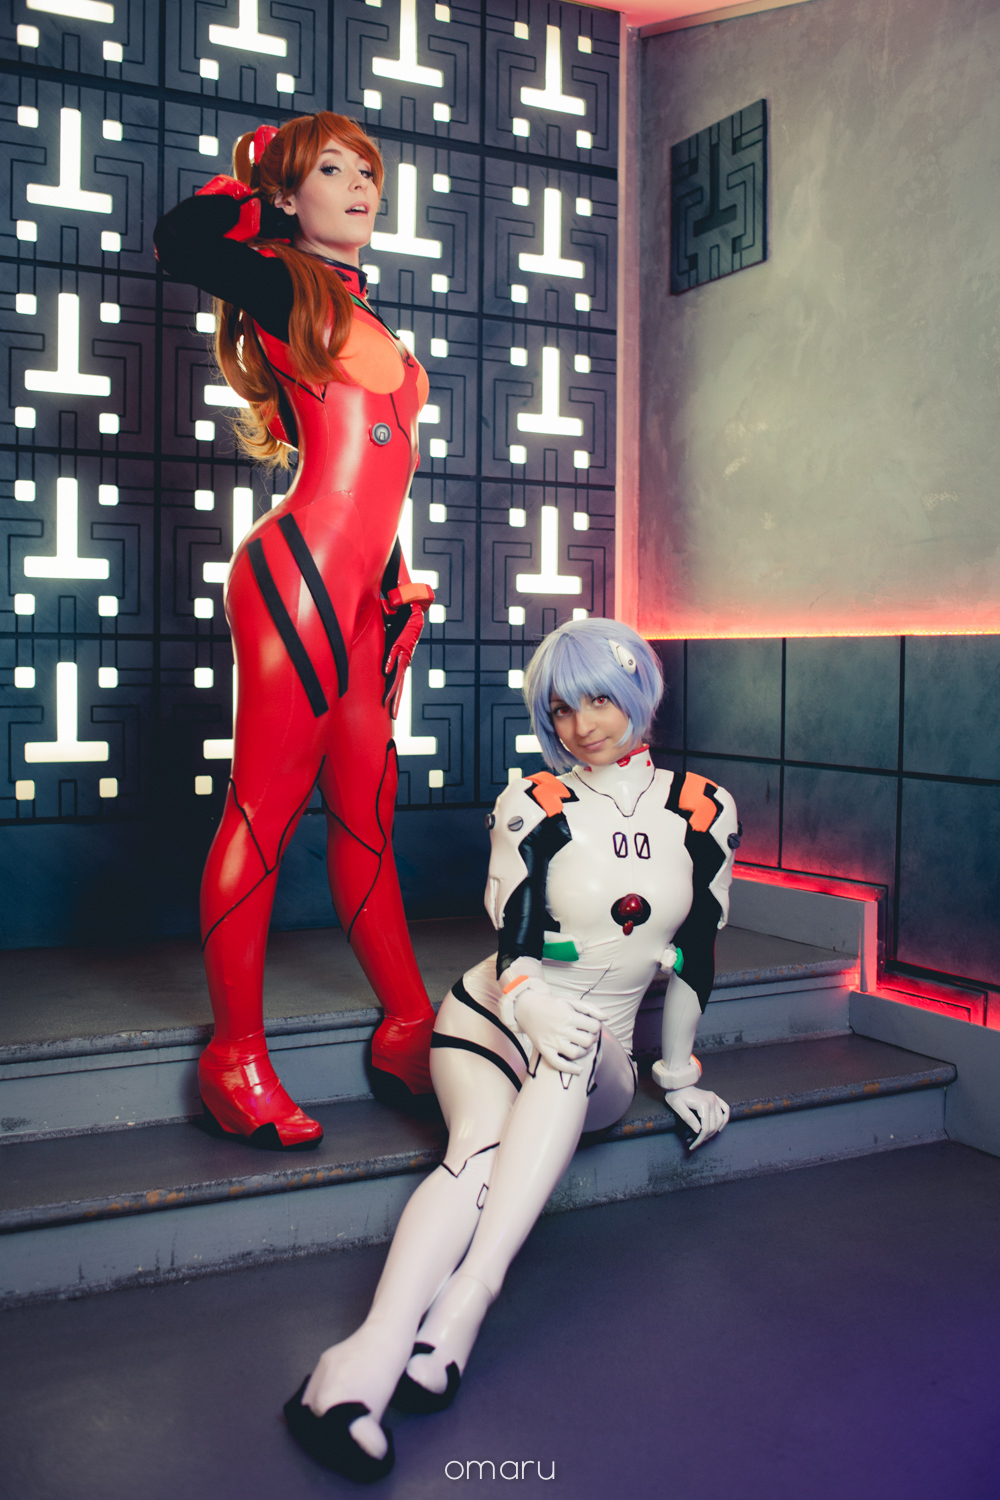 asuka And Rei By nikitacosplay d5r4ges